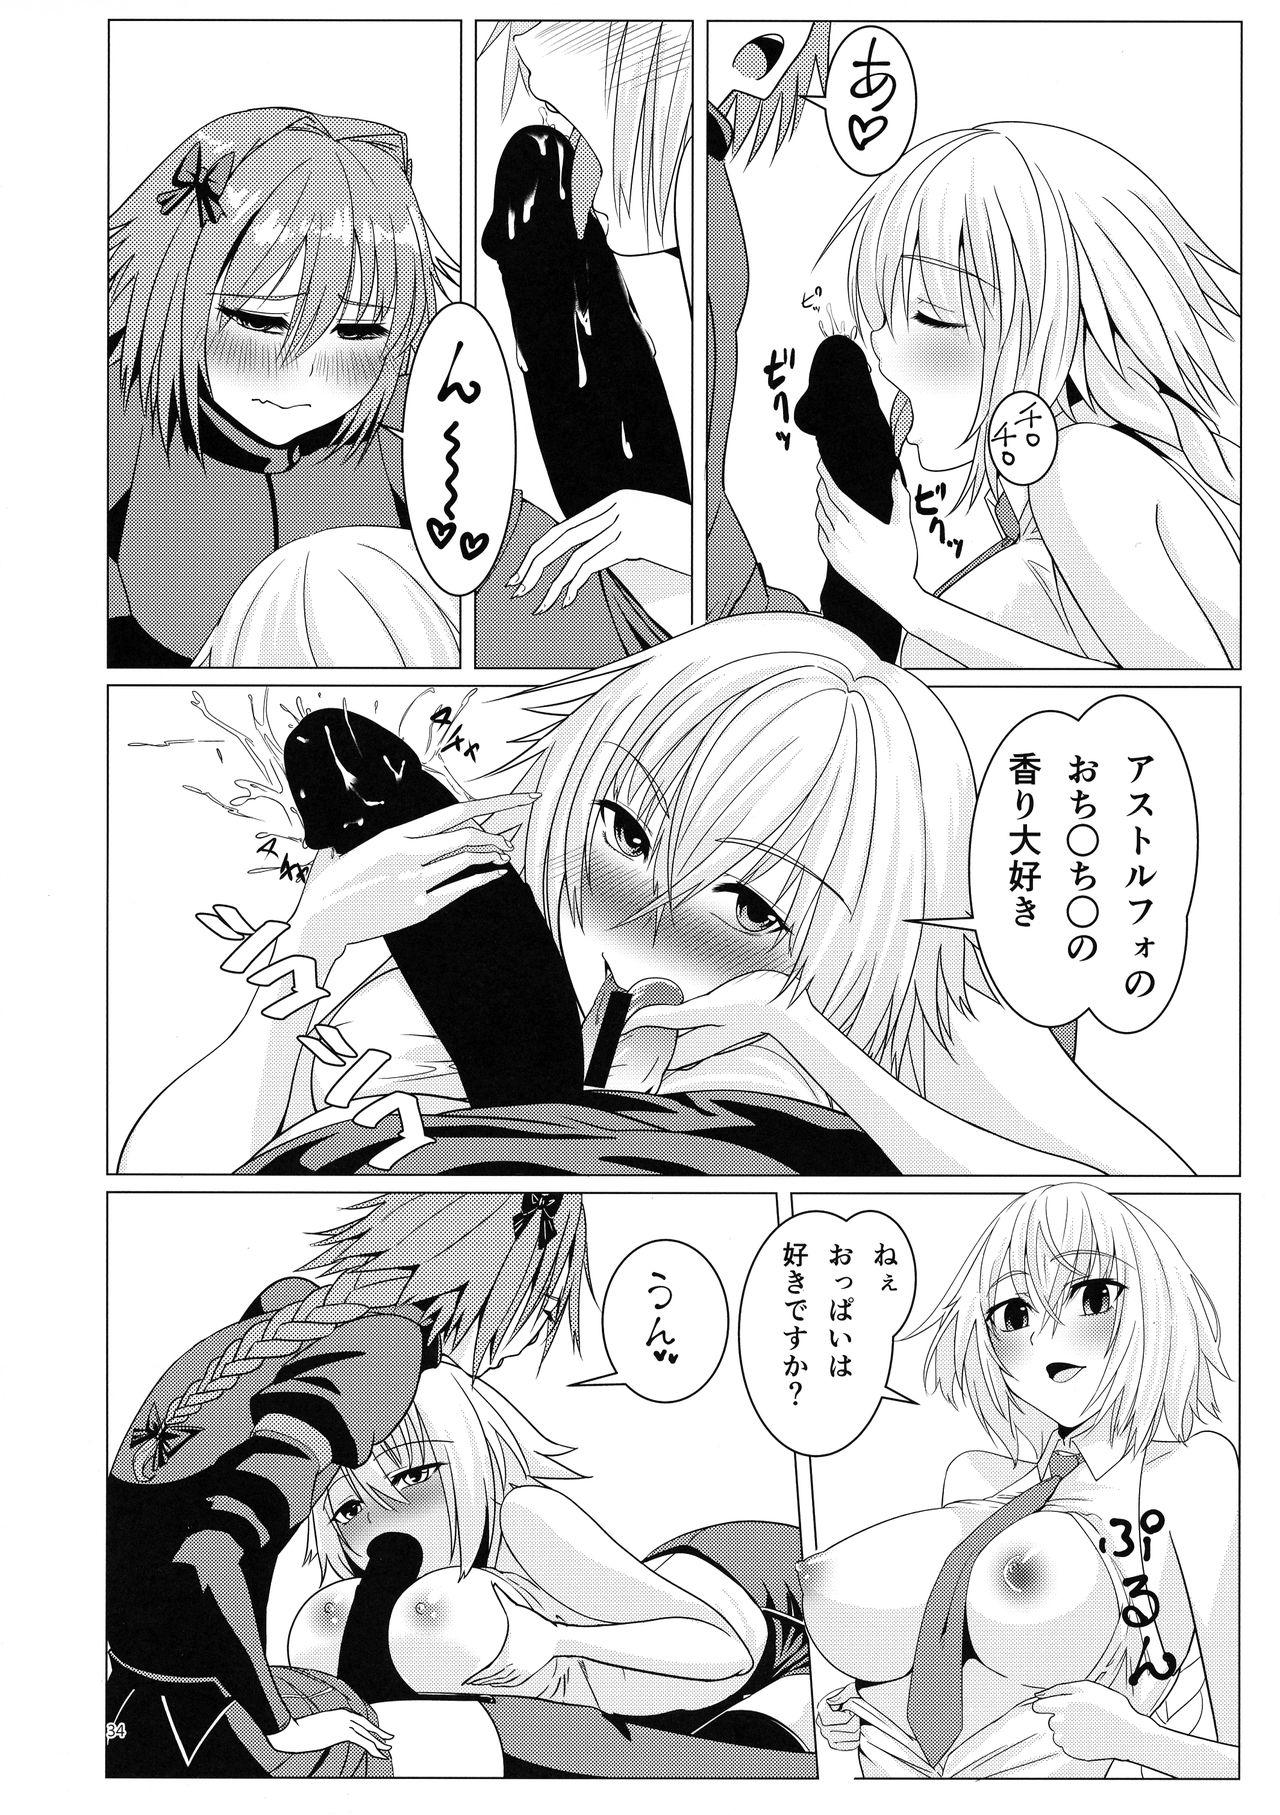 Matching Spirits - Jeanne and Astolfo have sex 31